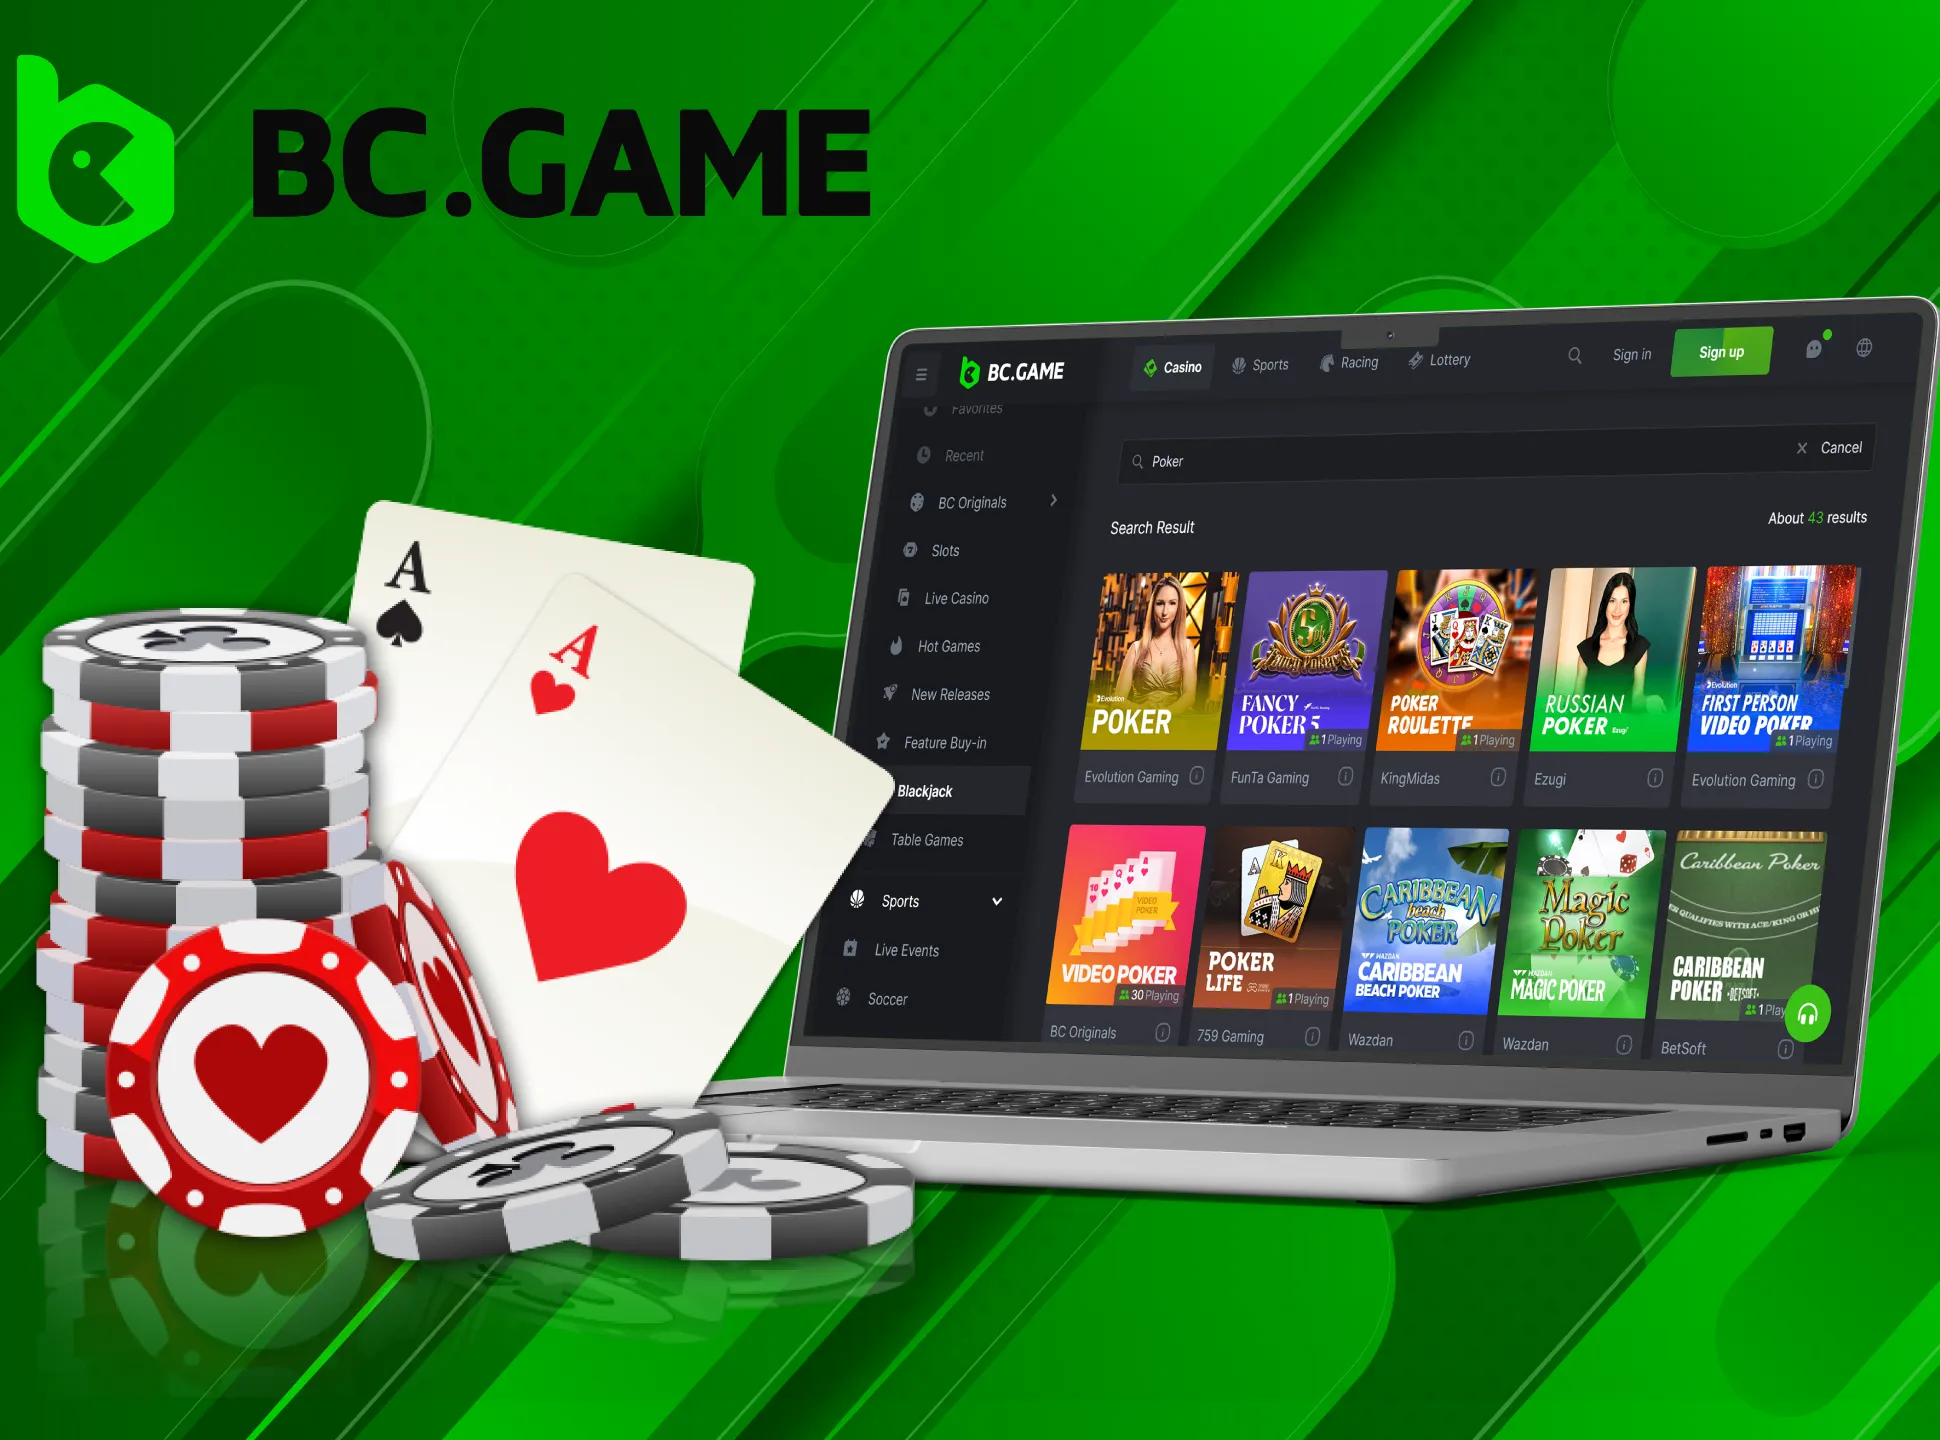 Use a defensive or attacking strategy when playing poker from BC Game.